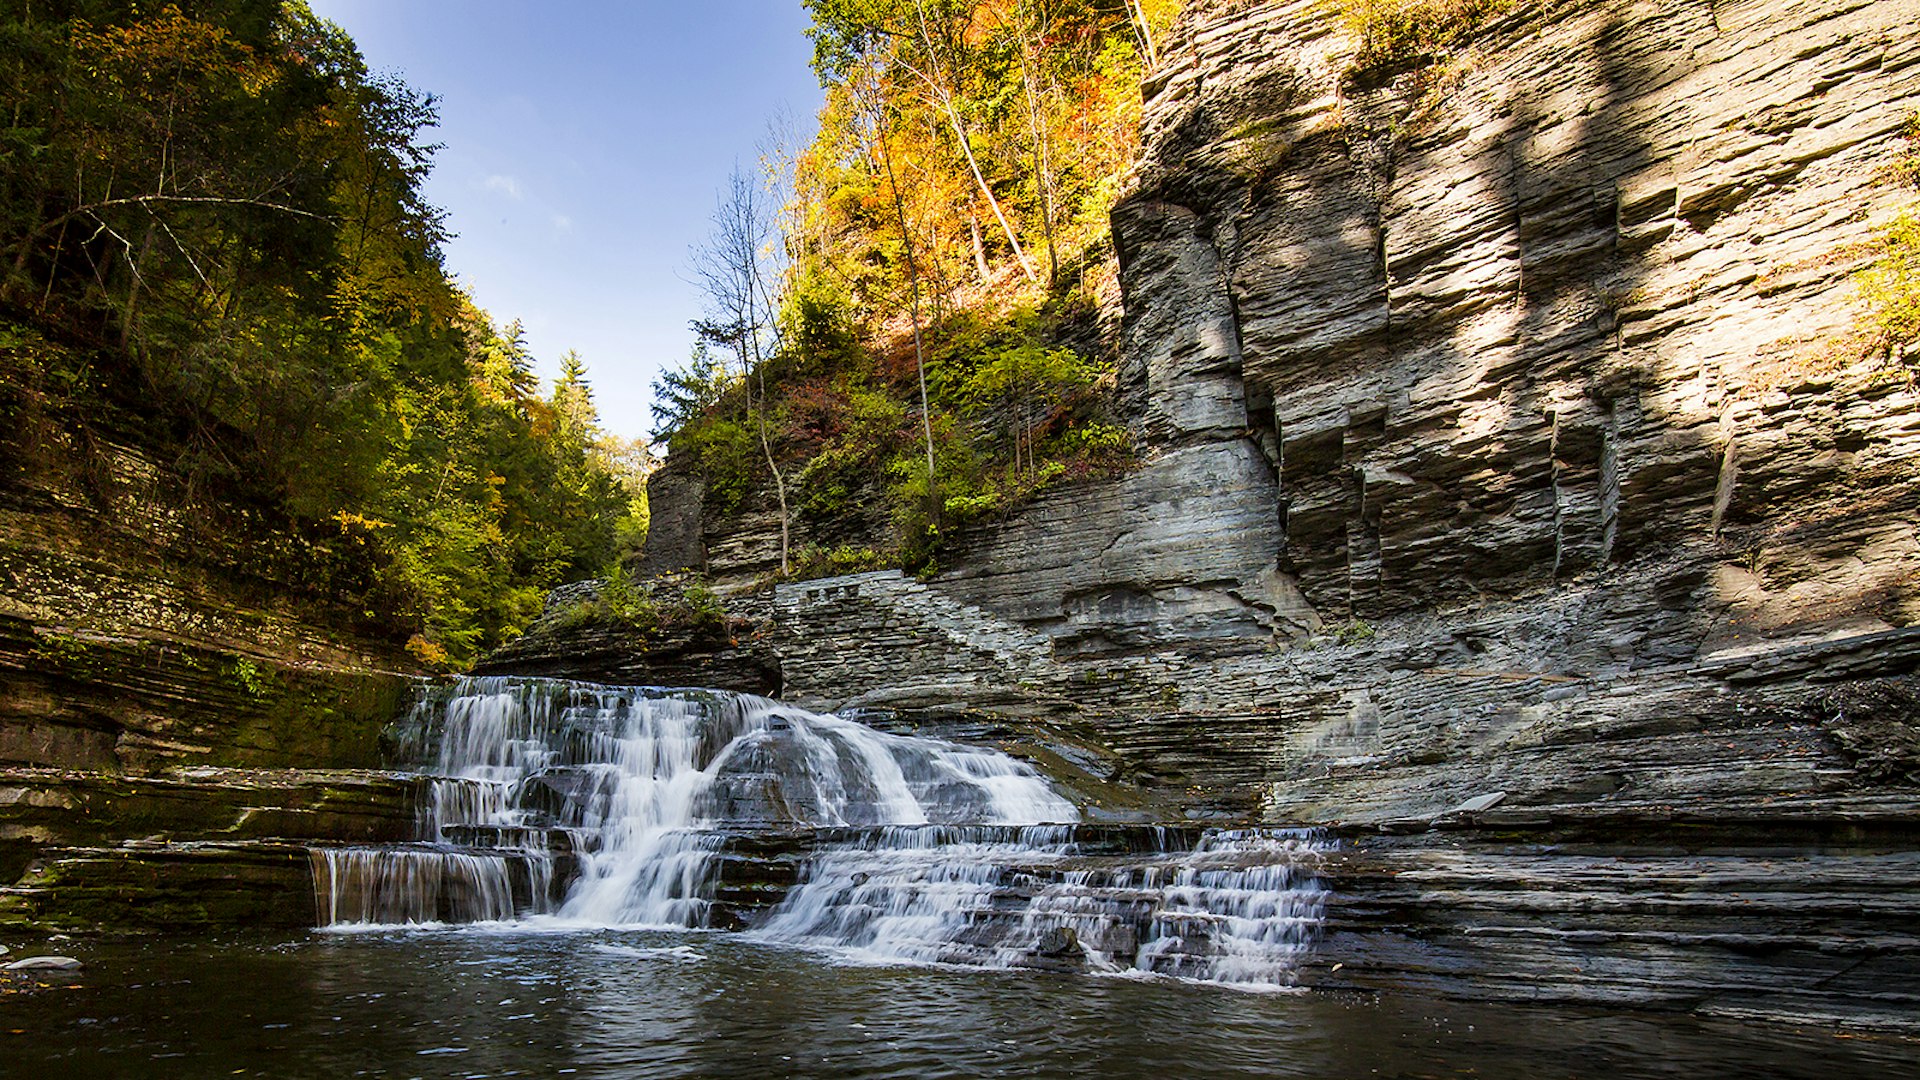 Waterfall cascading through a rugged stone gorge surrounded by fall foliage on a sunny fall day